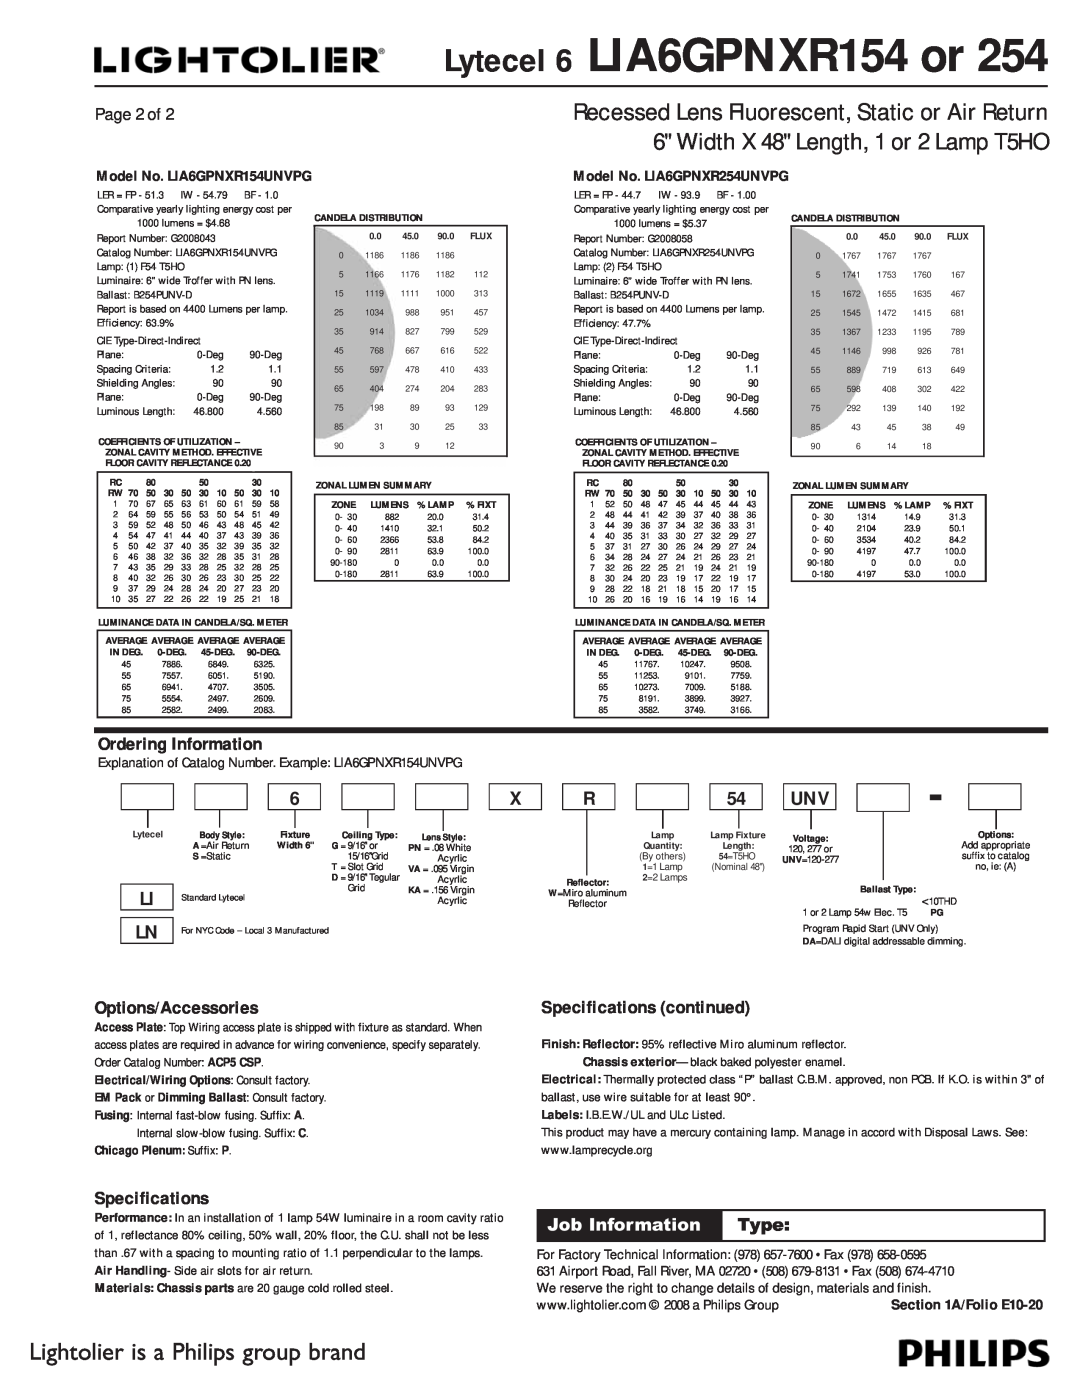 Lightolier LIA6GPNXR254 Ordering Information, Options/Accessories, Specifications continued, Page 2 of, A/Folio E10-20 